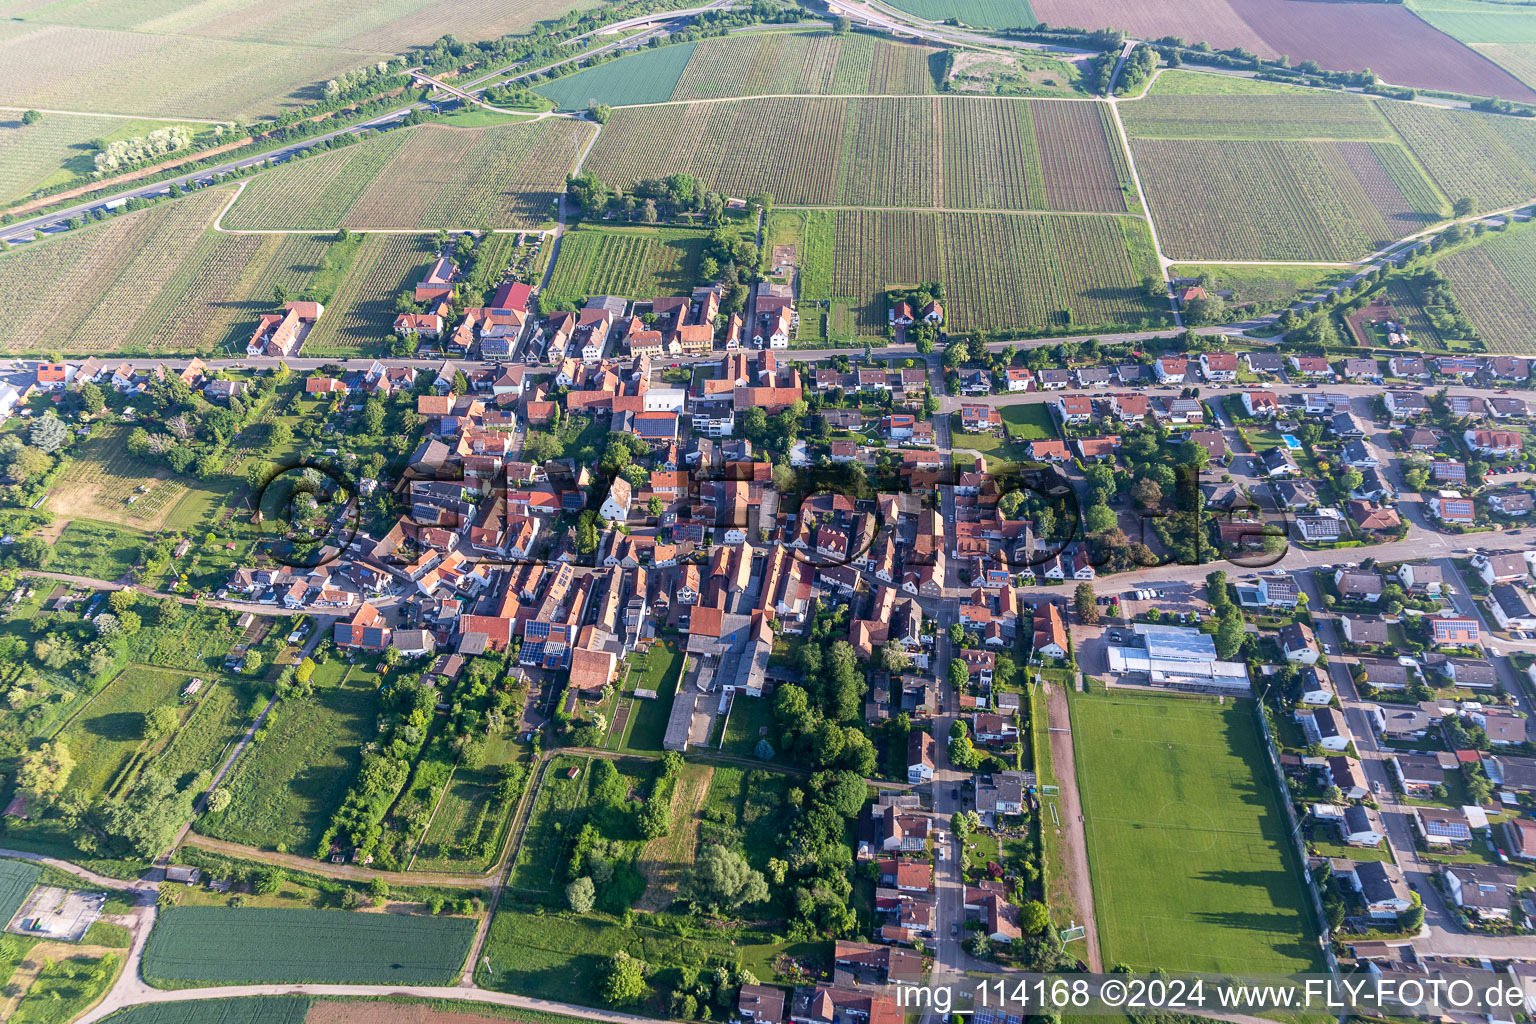 Bird's eye view of Agricultural land and field borders surround the settlement area of the village in Dammheim in the state Rhineland-Palatinate, Germany